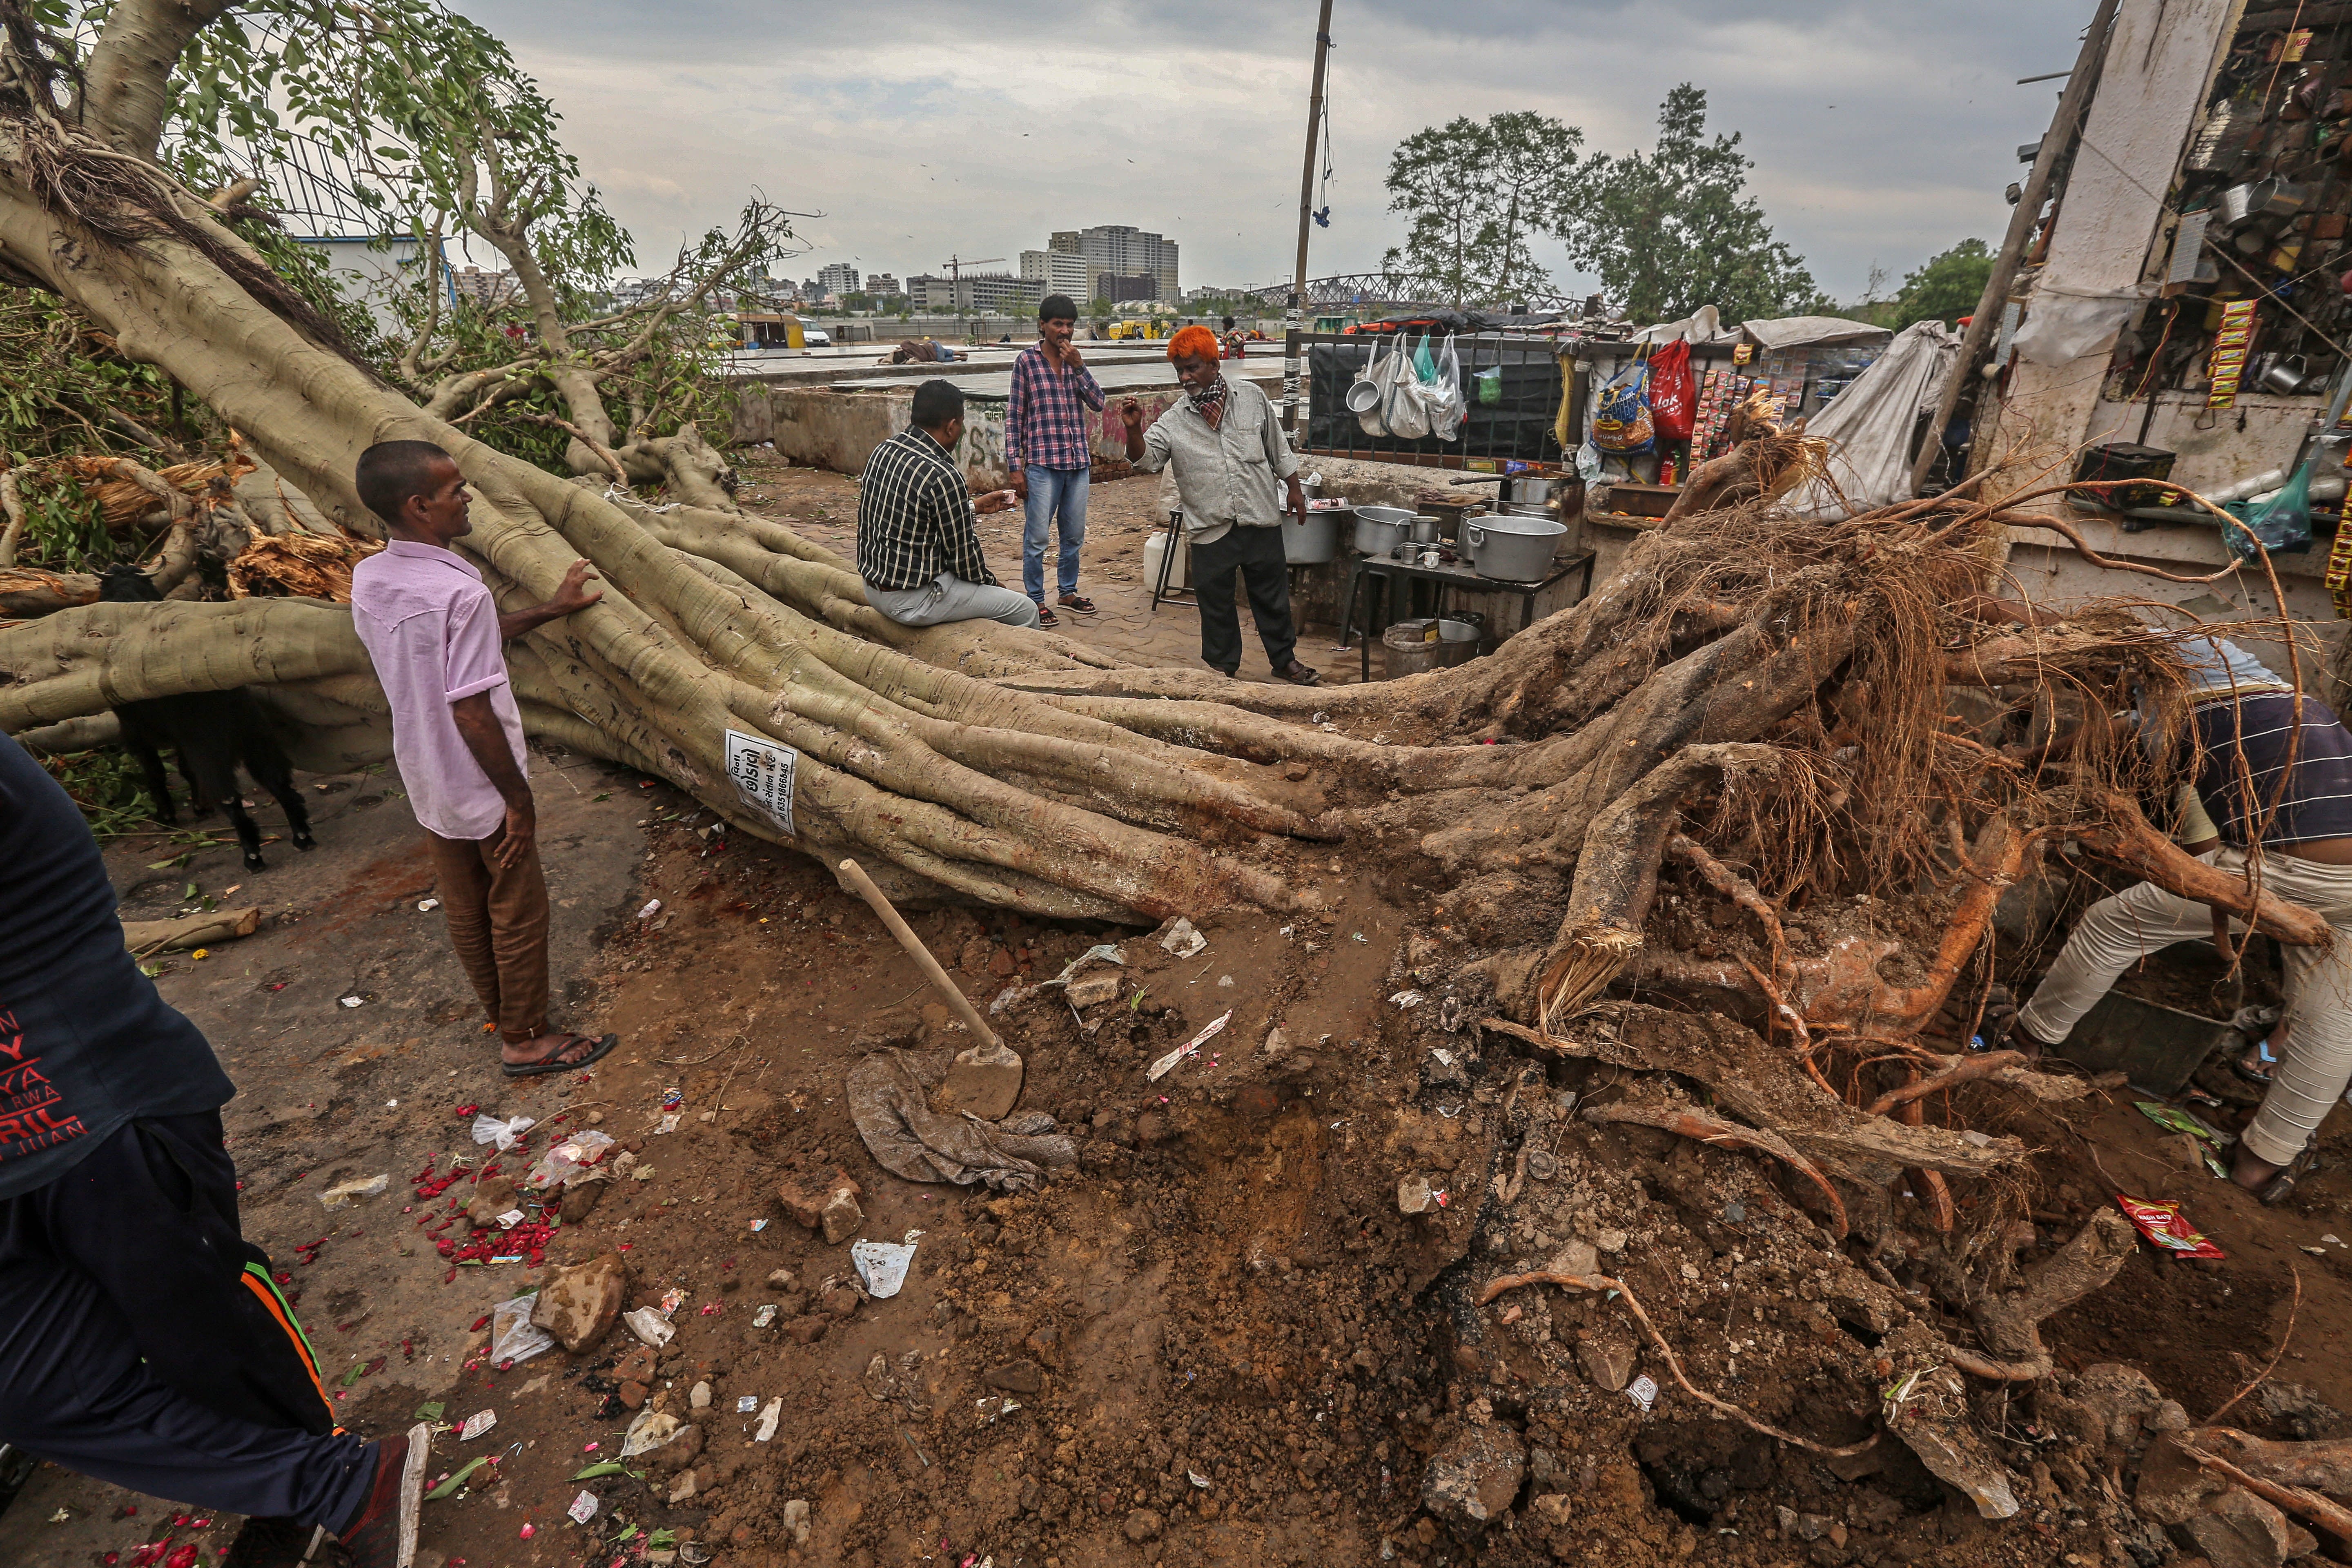 A tree uprooted by cyclone in Ahmedabad, Gujarat